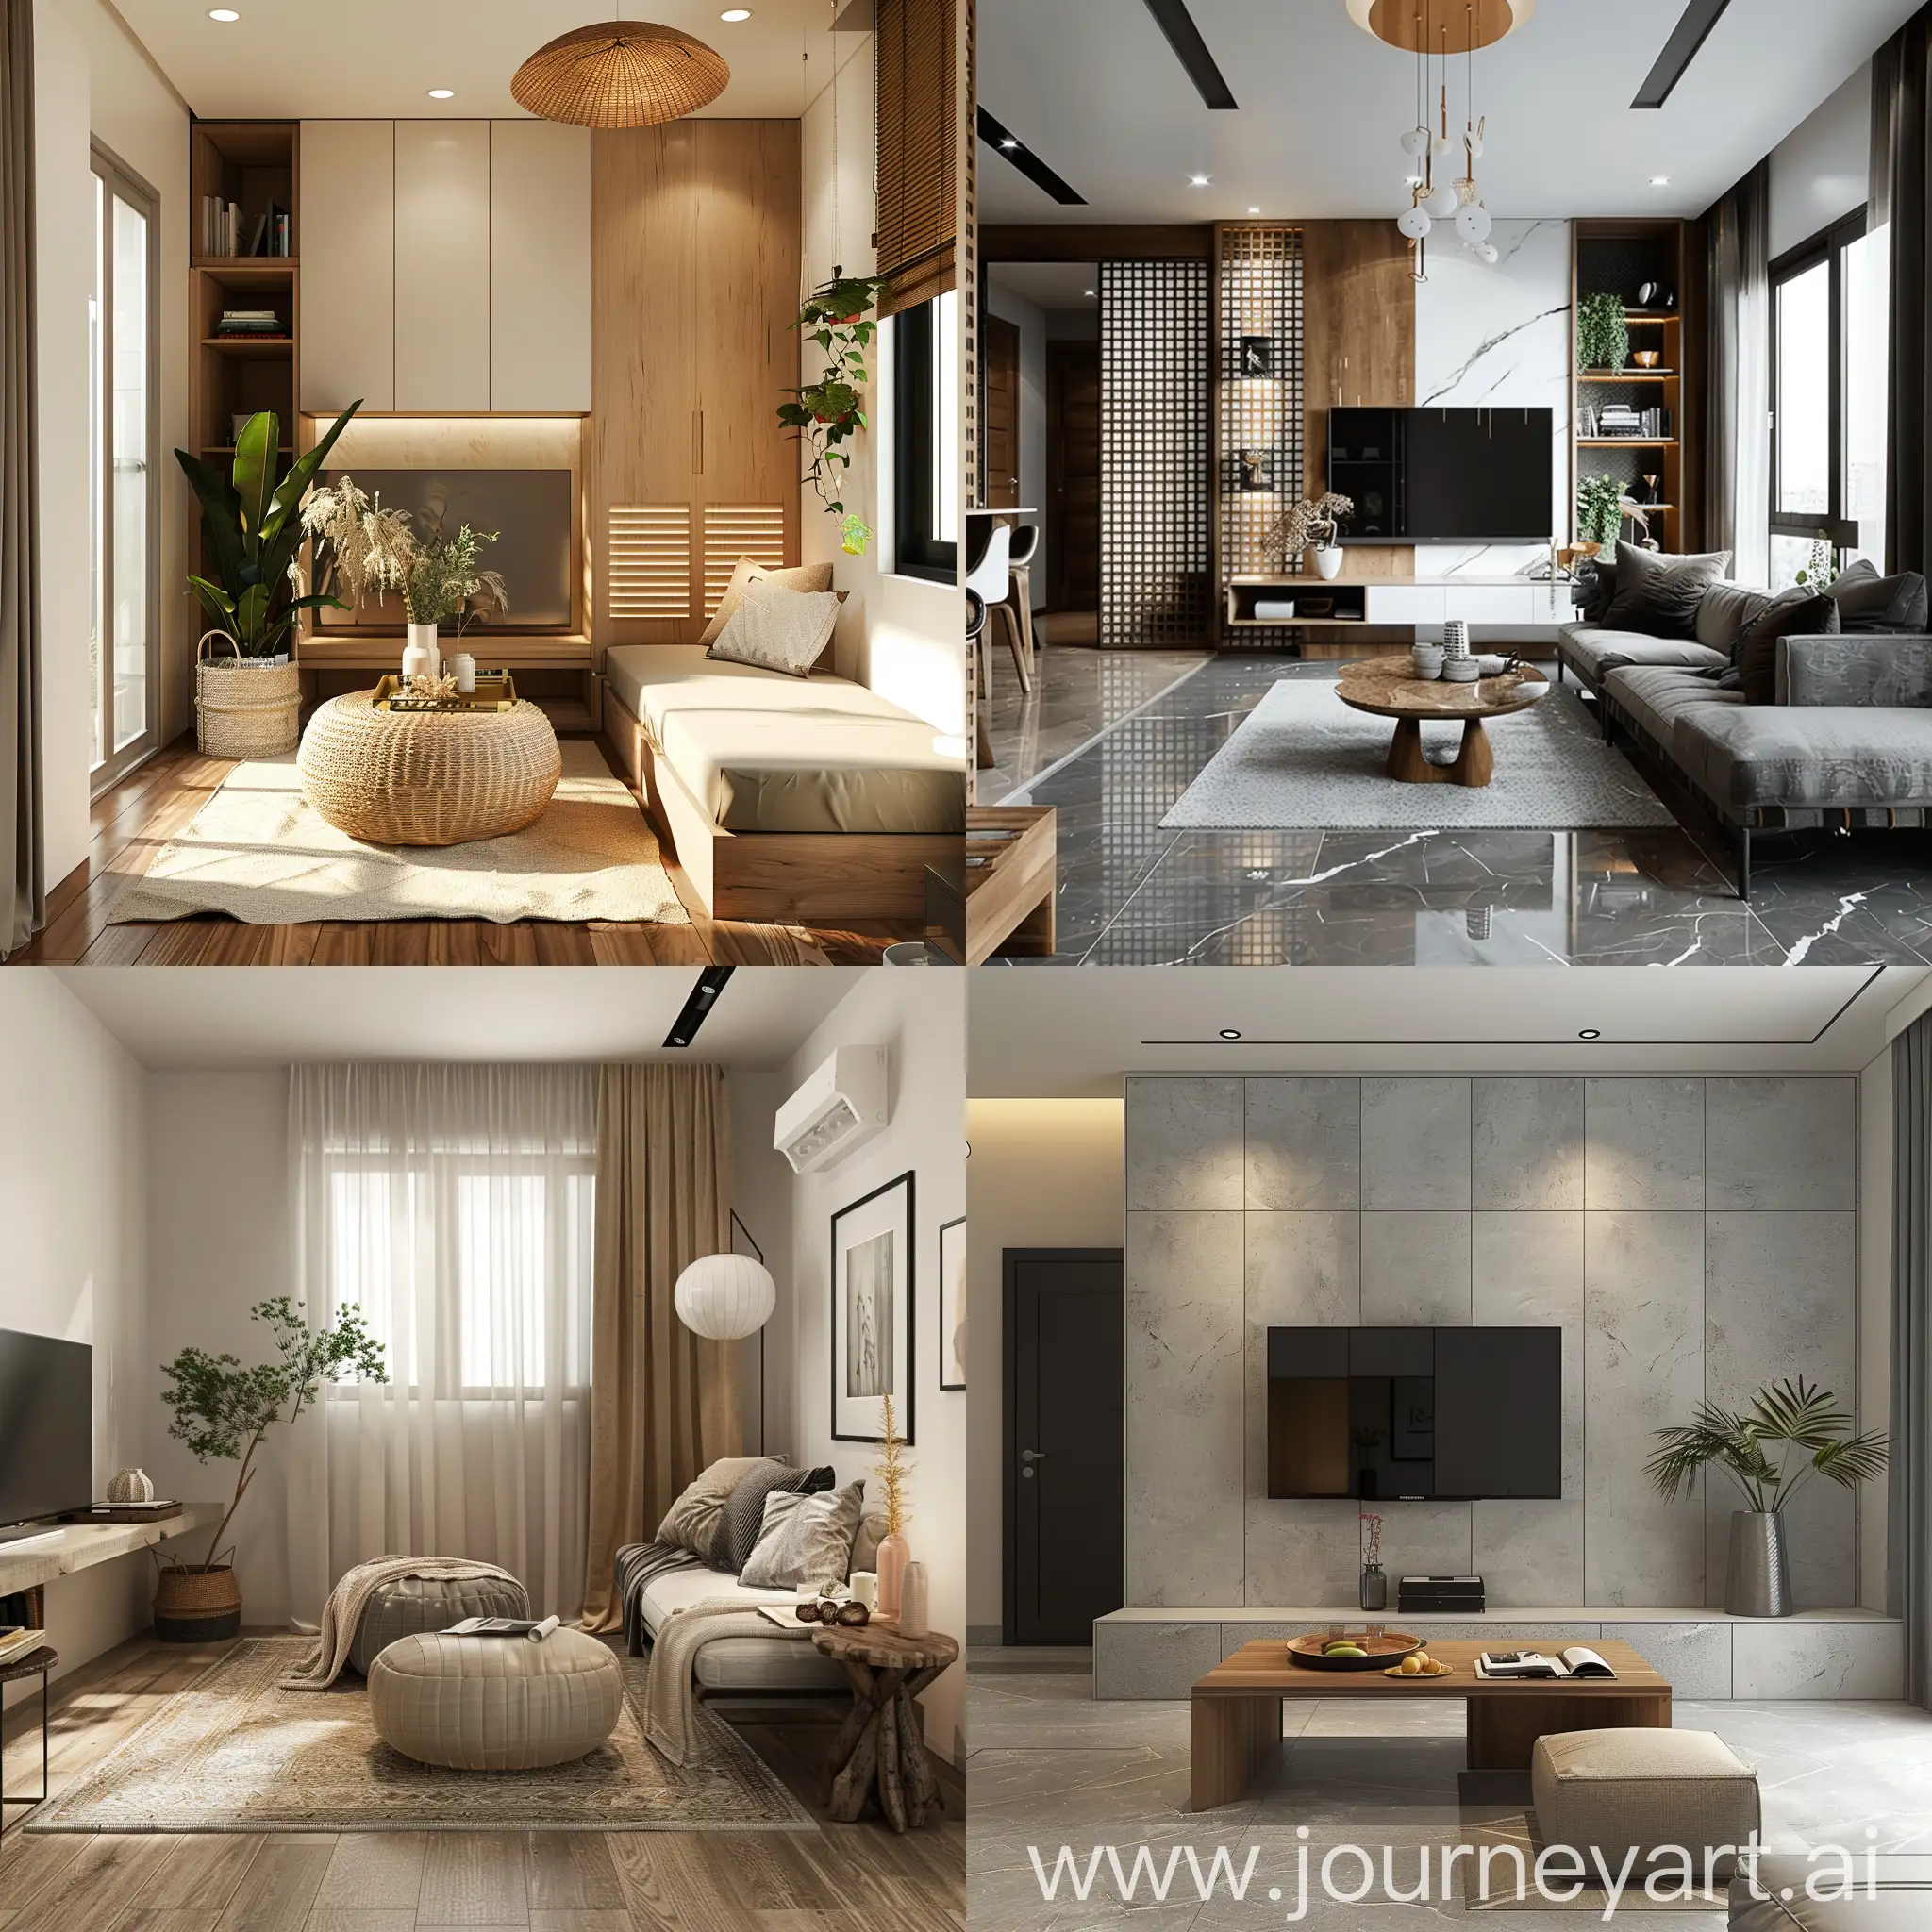 Cozy-Interior-Design-of-4m-x-25m-Room-with-Natural-Lighting